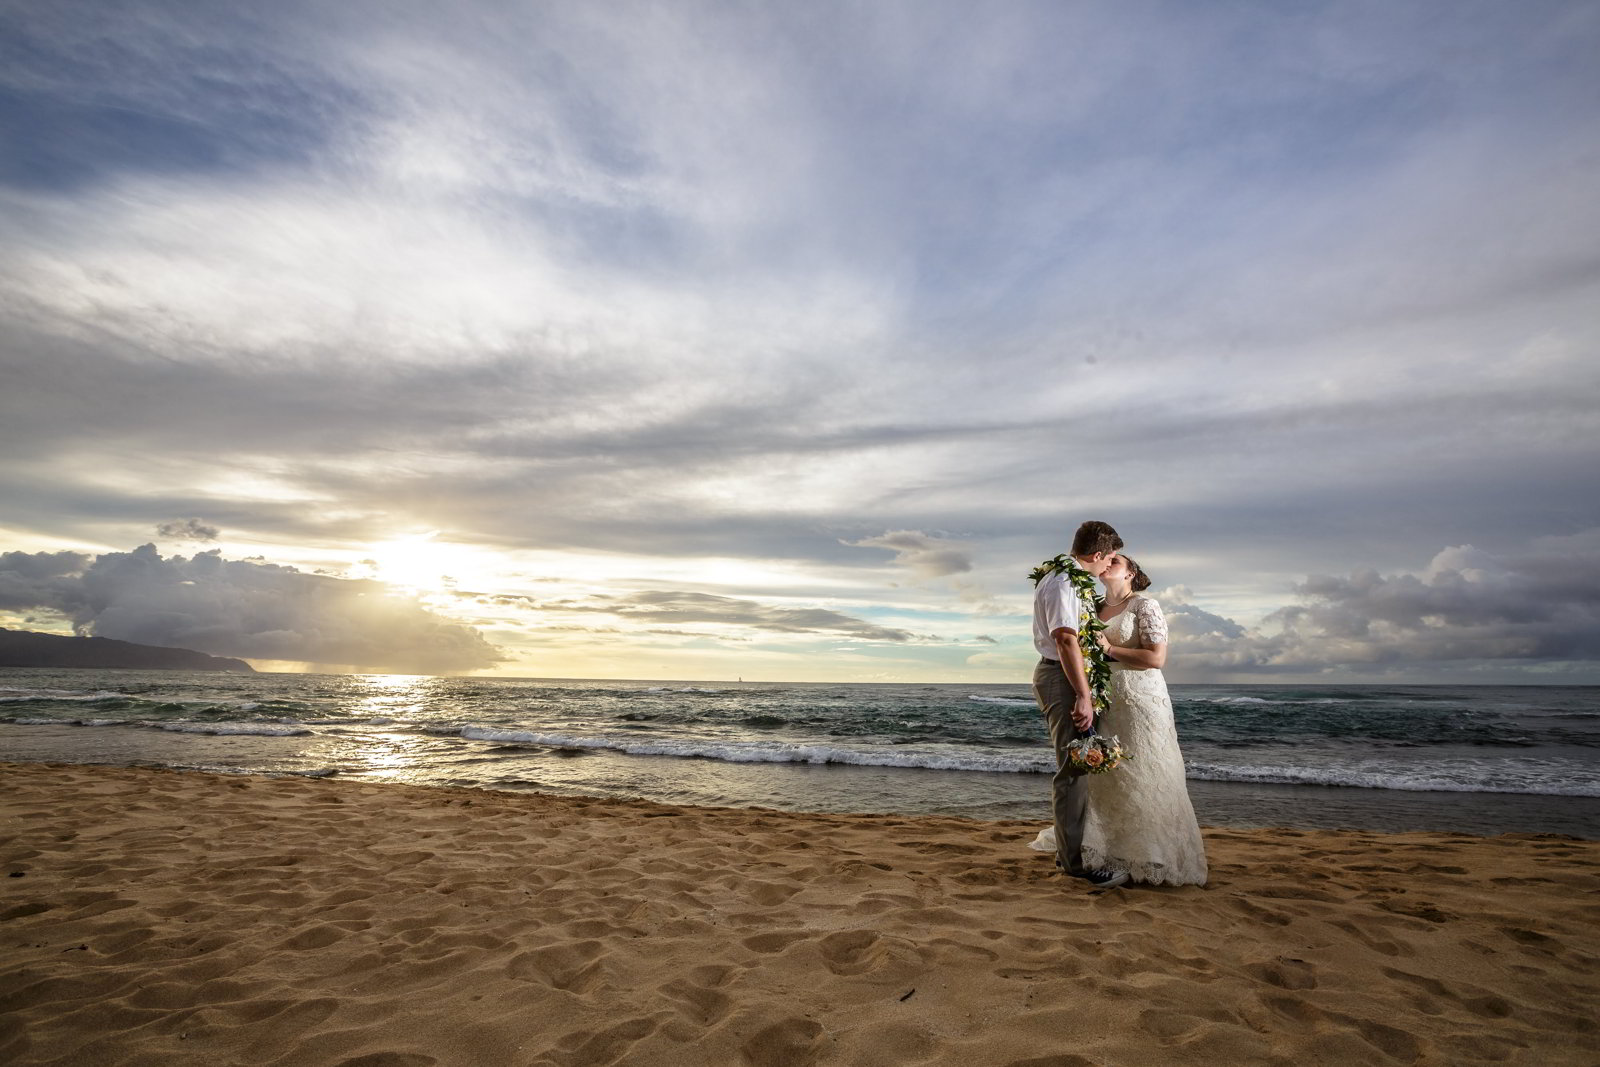 An image of a bride and groom on a beach in Hawaii